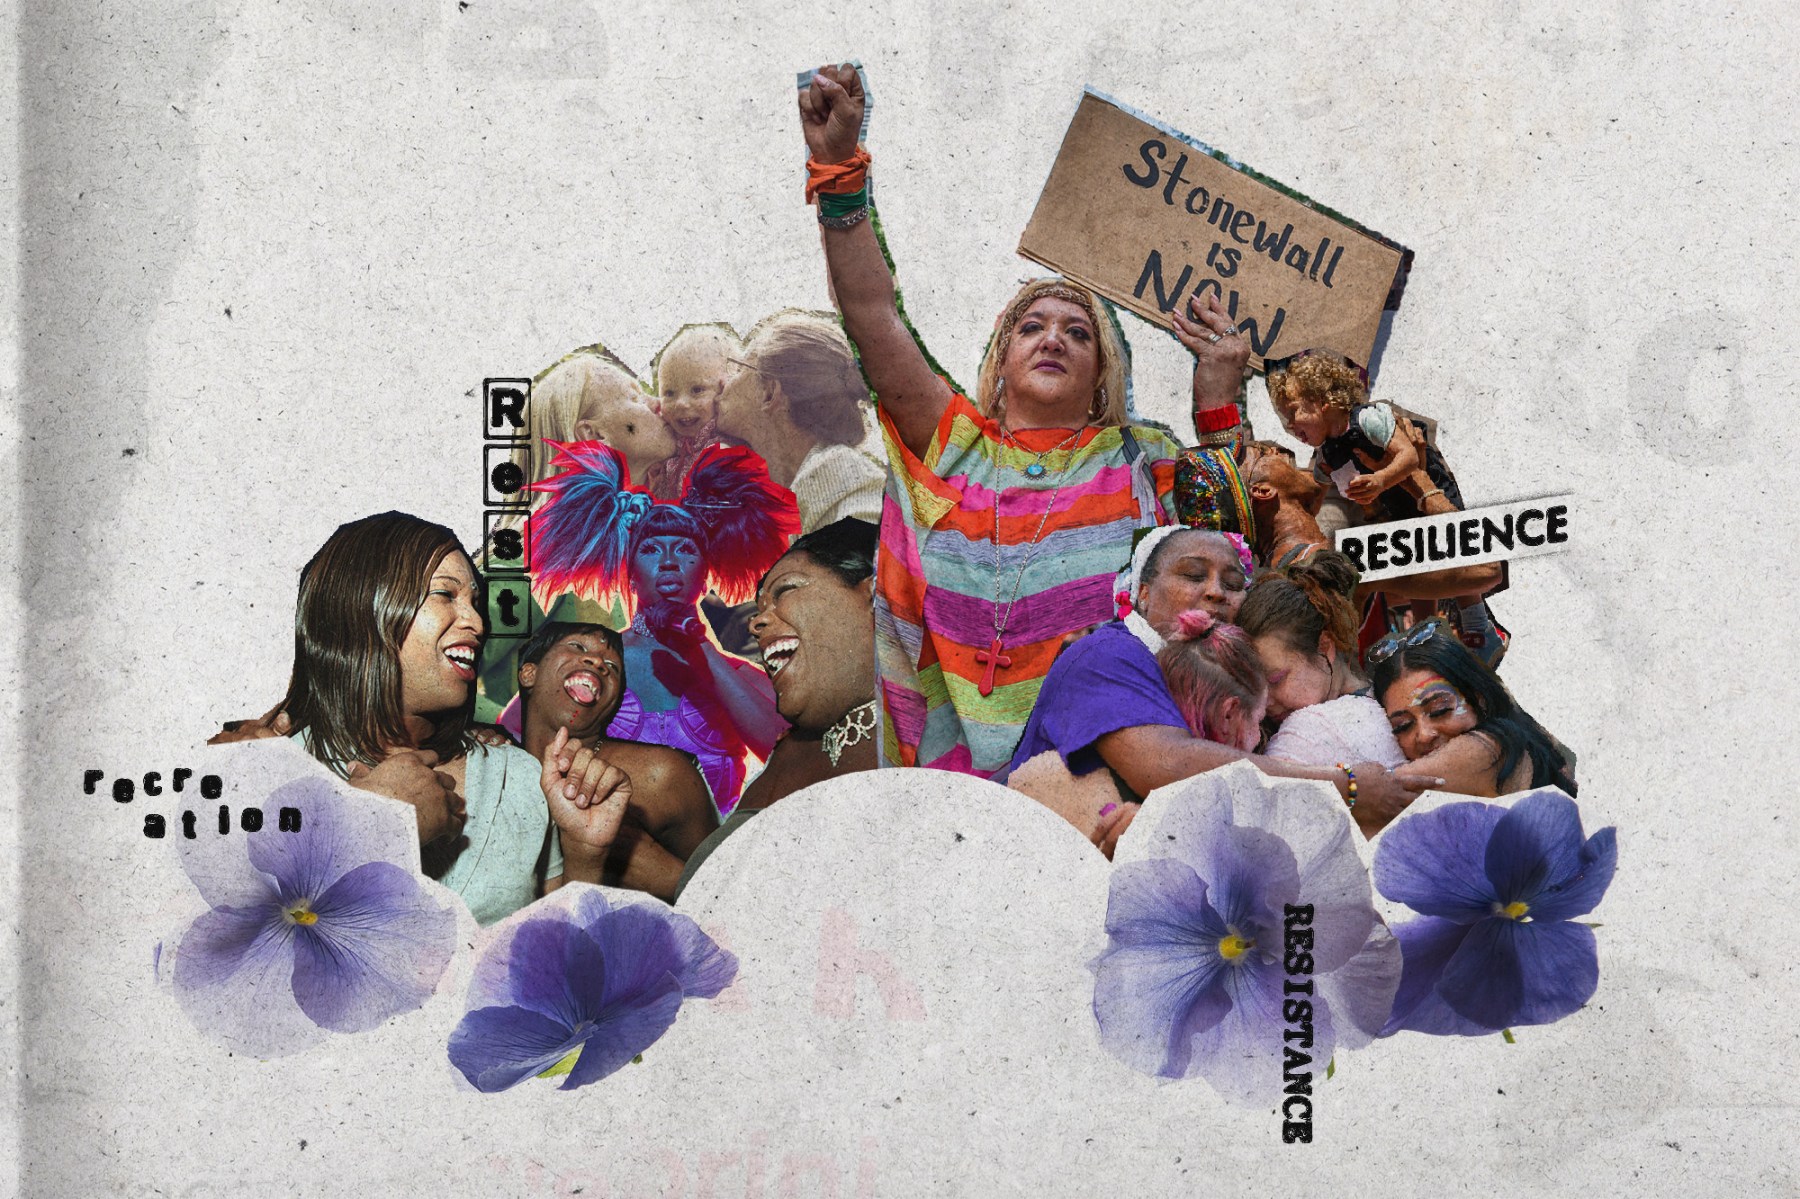 Photo collage of people hugging, dancing, celebrating pride and protesting with the words "recreation, rest, resilience and resistance" sprinkled around the images.